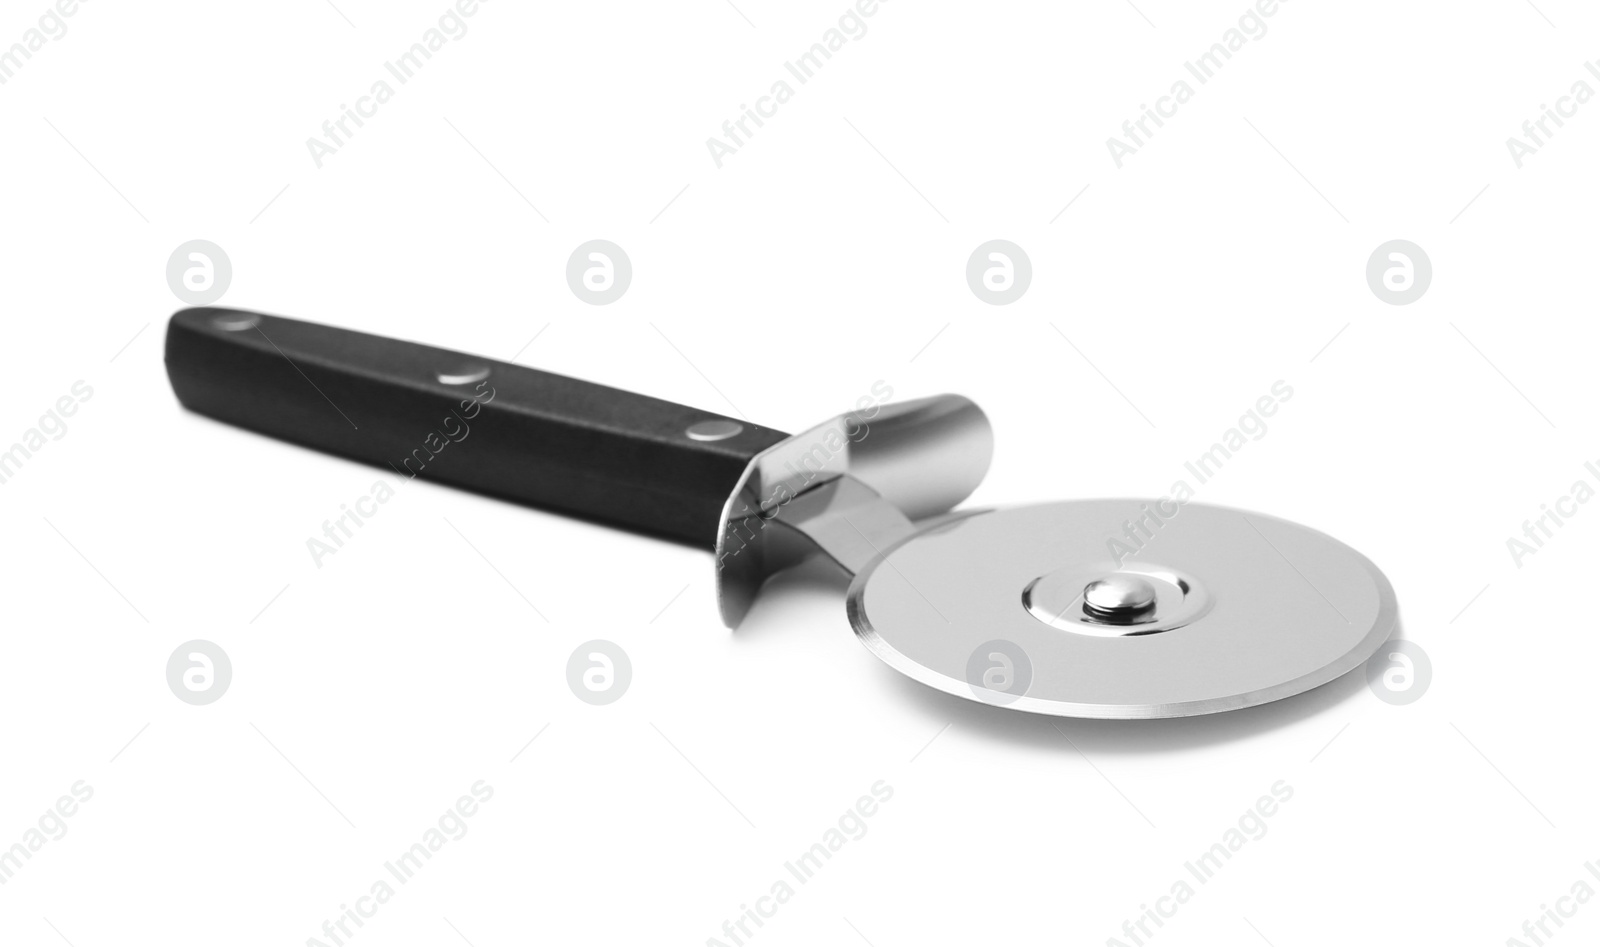 Photo of New pizza cutter with black handle isolated on white